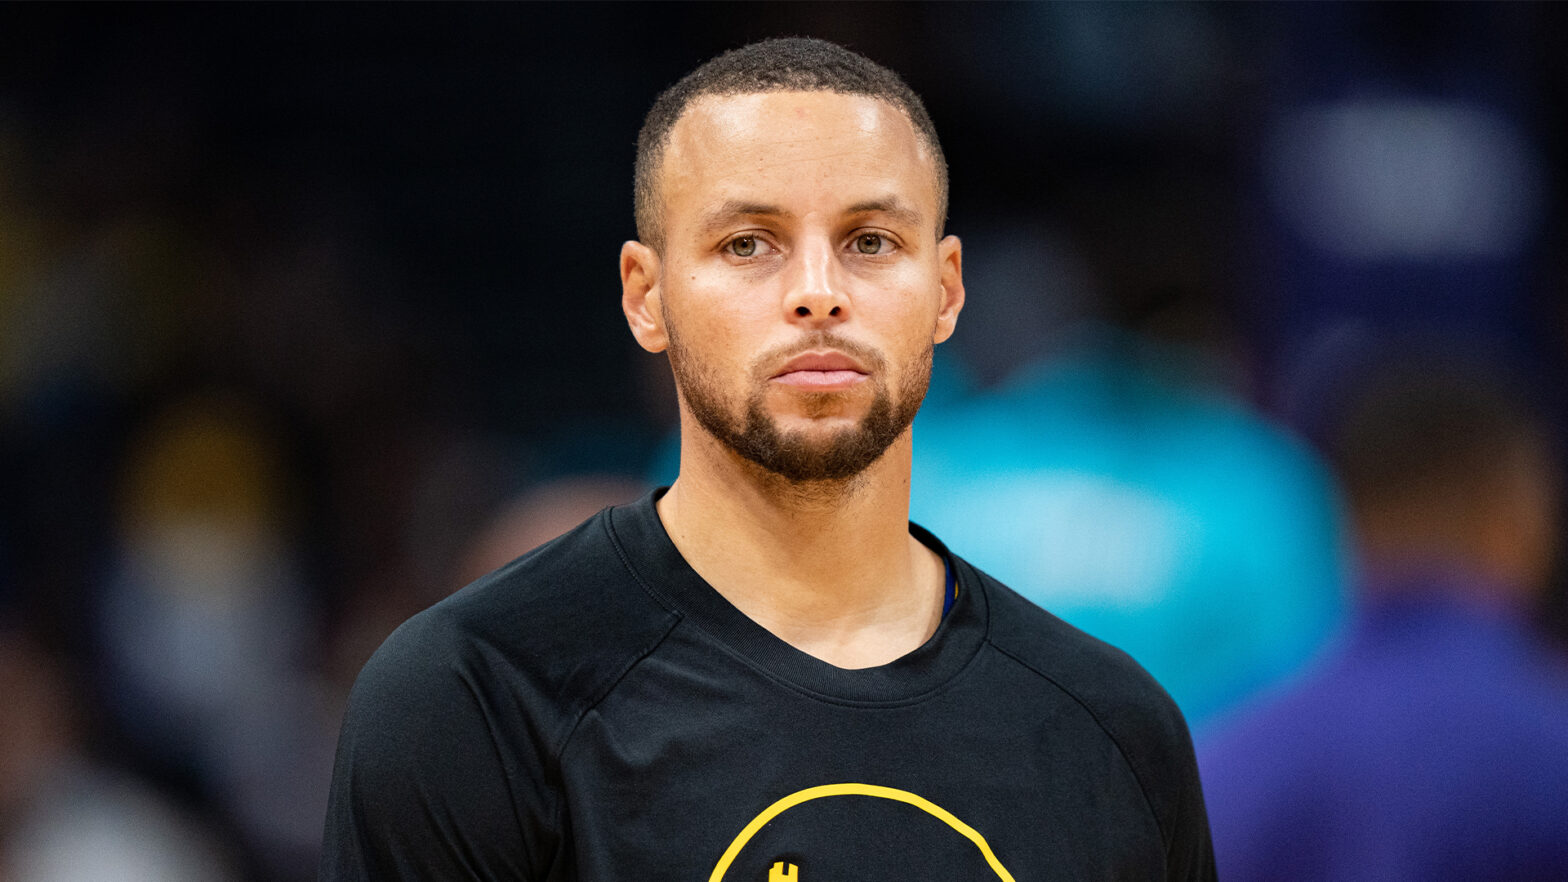 What Pros Wear: Under Armour Unveils the Curry Brand Alongside